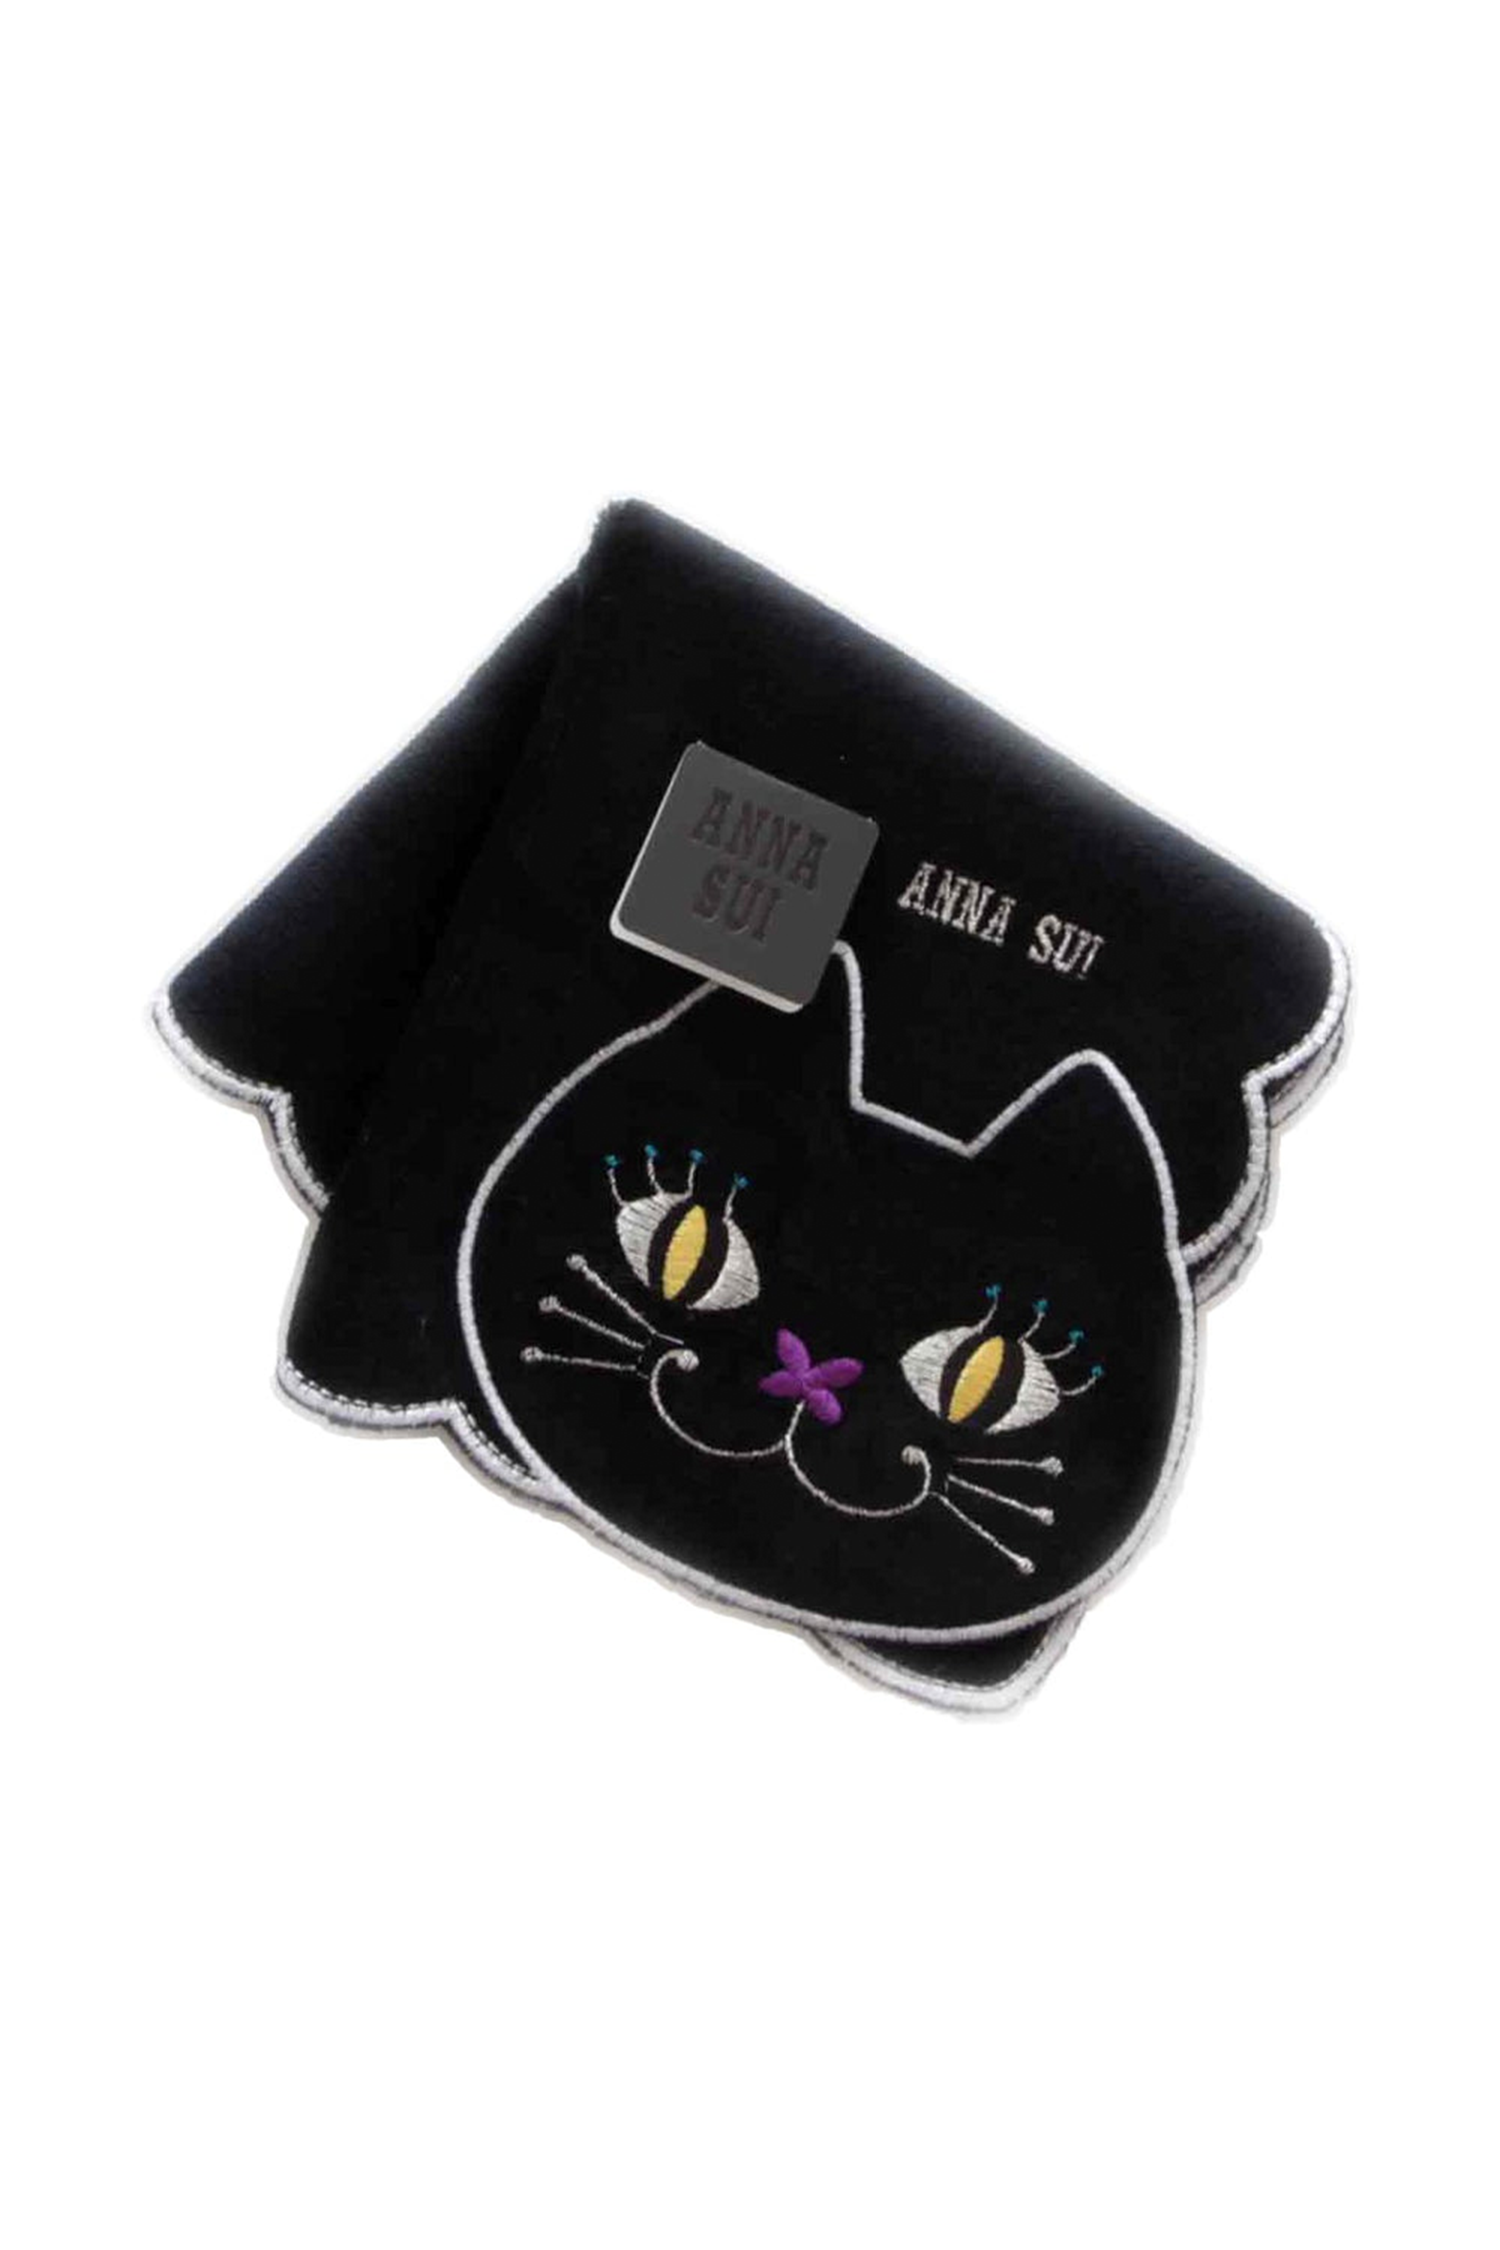 Black washcloth, wavy hems, cat with white borders, yellow eyes, pink nose, Anna Sui in a grey tag 